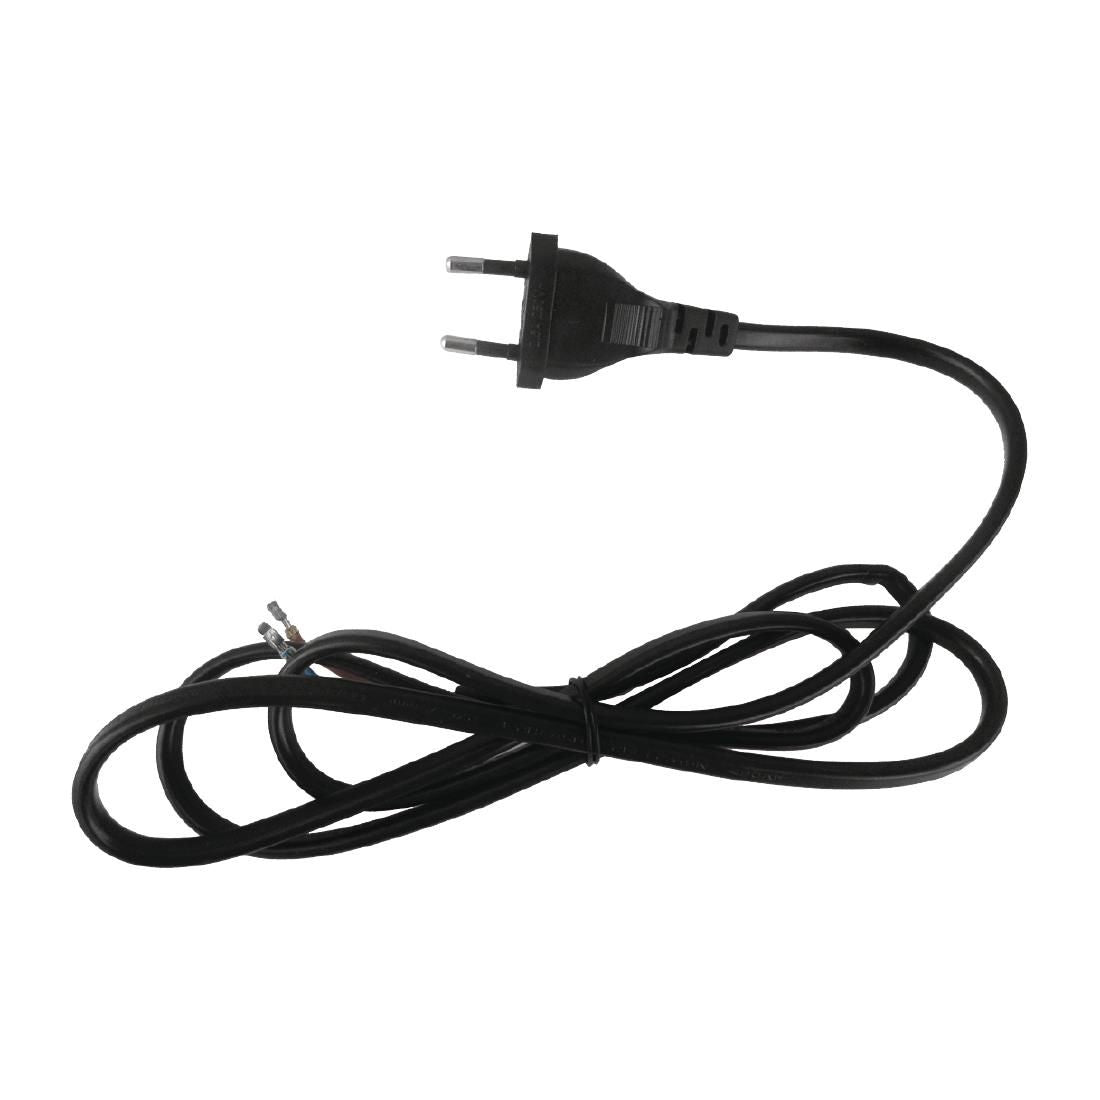 Buffalo Power Cord for Vacuum Packing Machine JD Catering Equipment Solutions Ltd